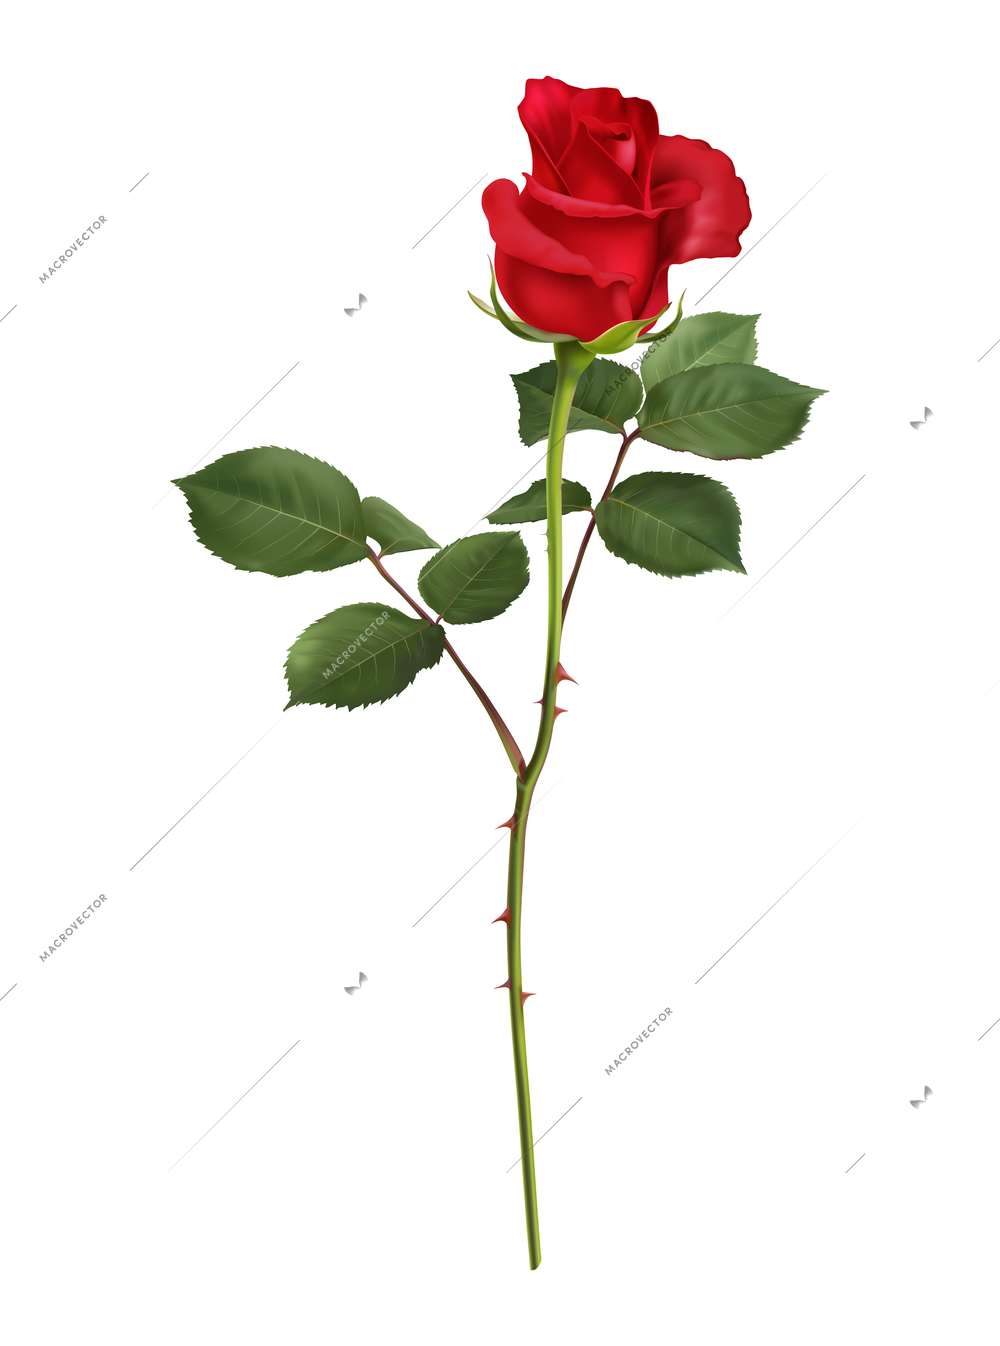 Realistic blooming red rose with green leaves vector illustration